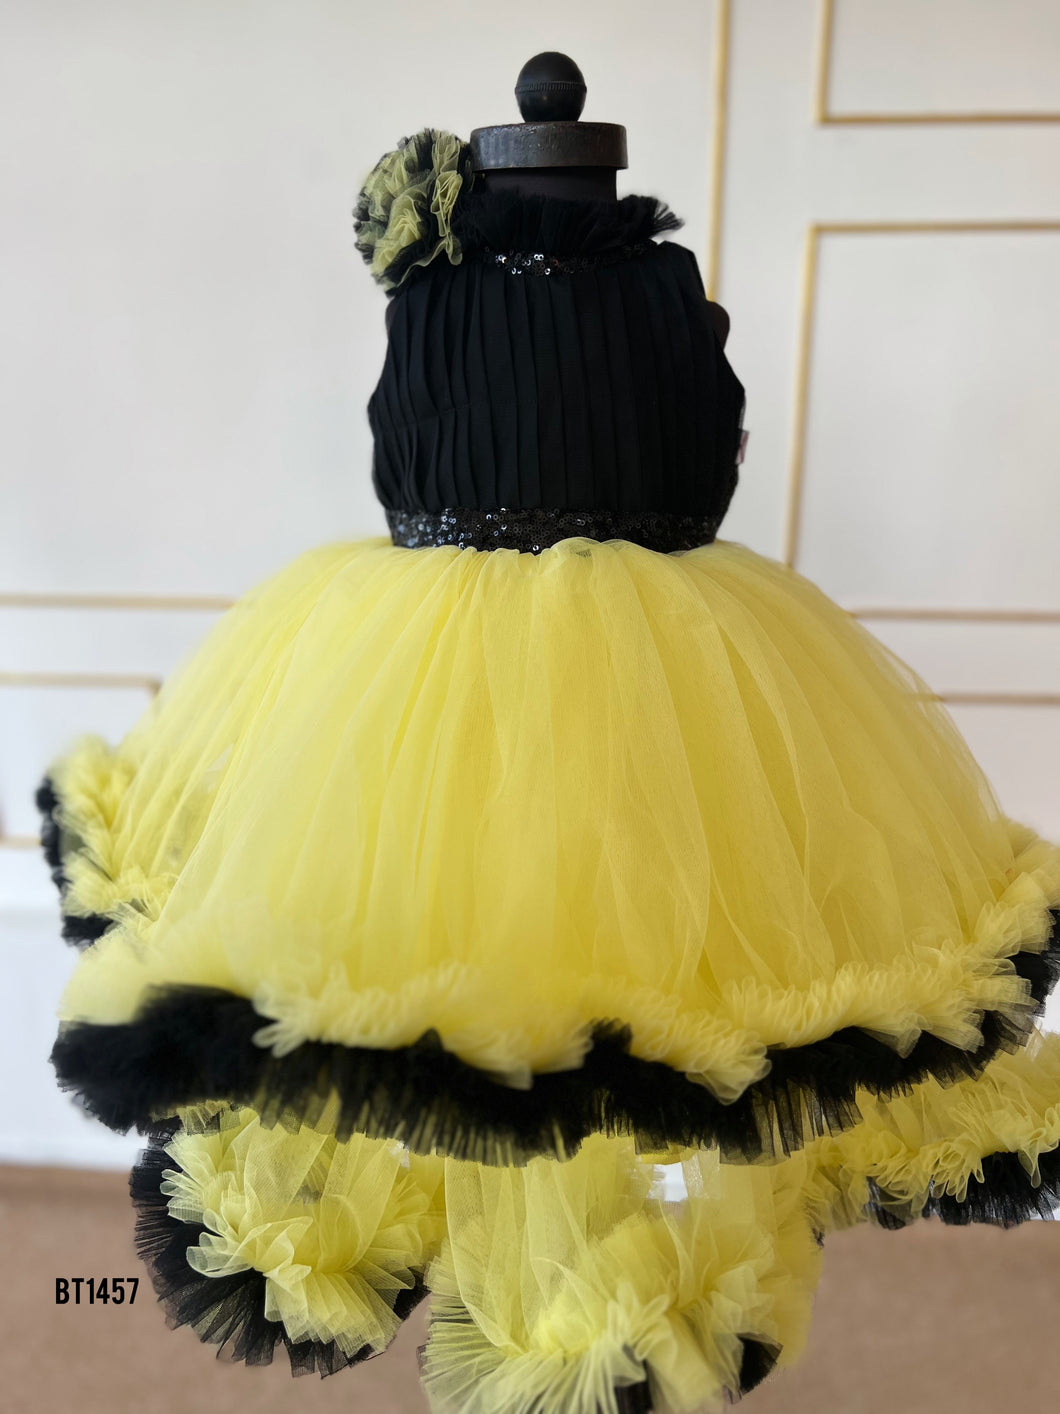 BT1457 Sunny Delight Frill Fantasy Dress for Magical Moments